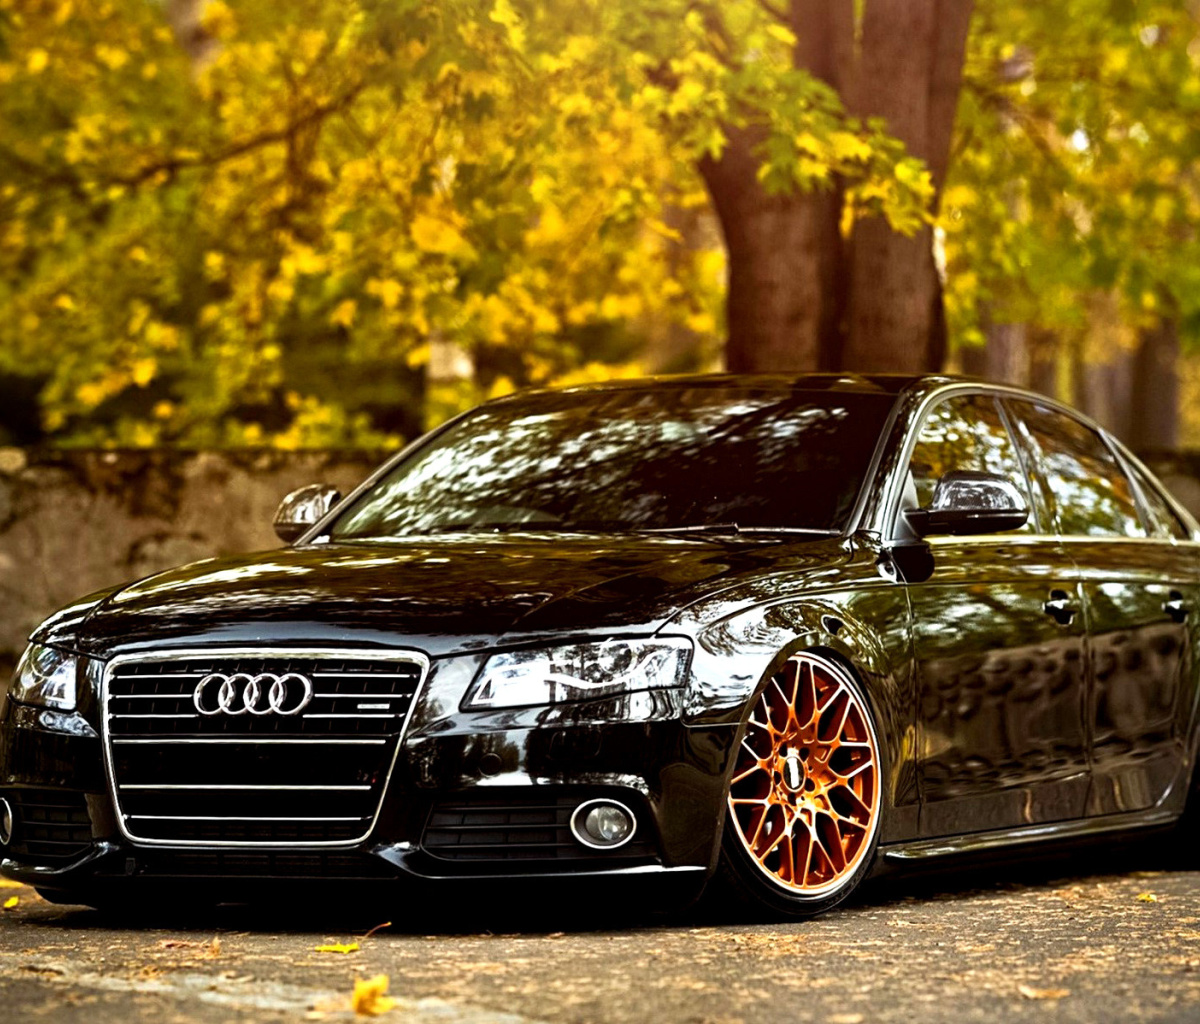 Audi A4 with New Rims wallpaper 1200x1024